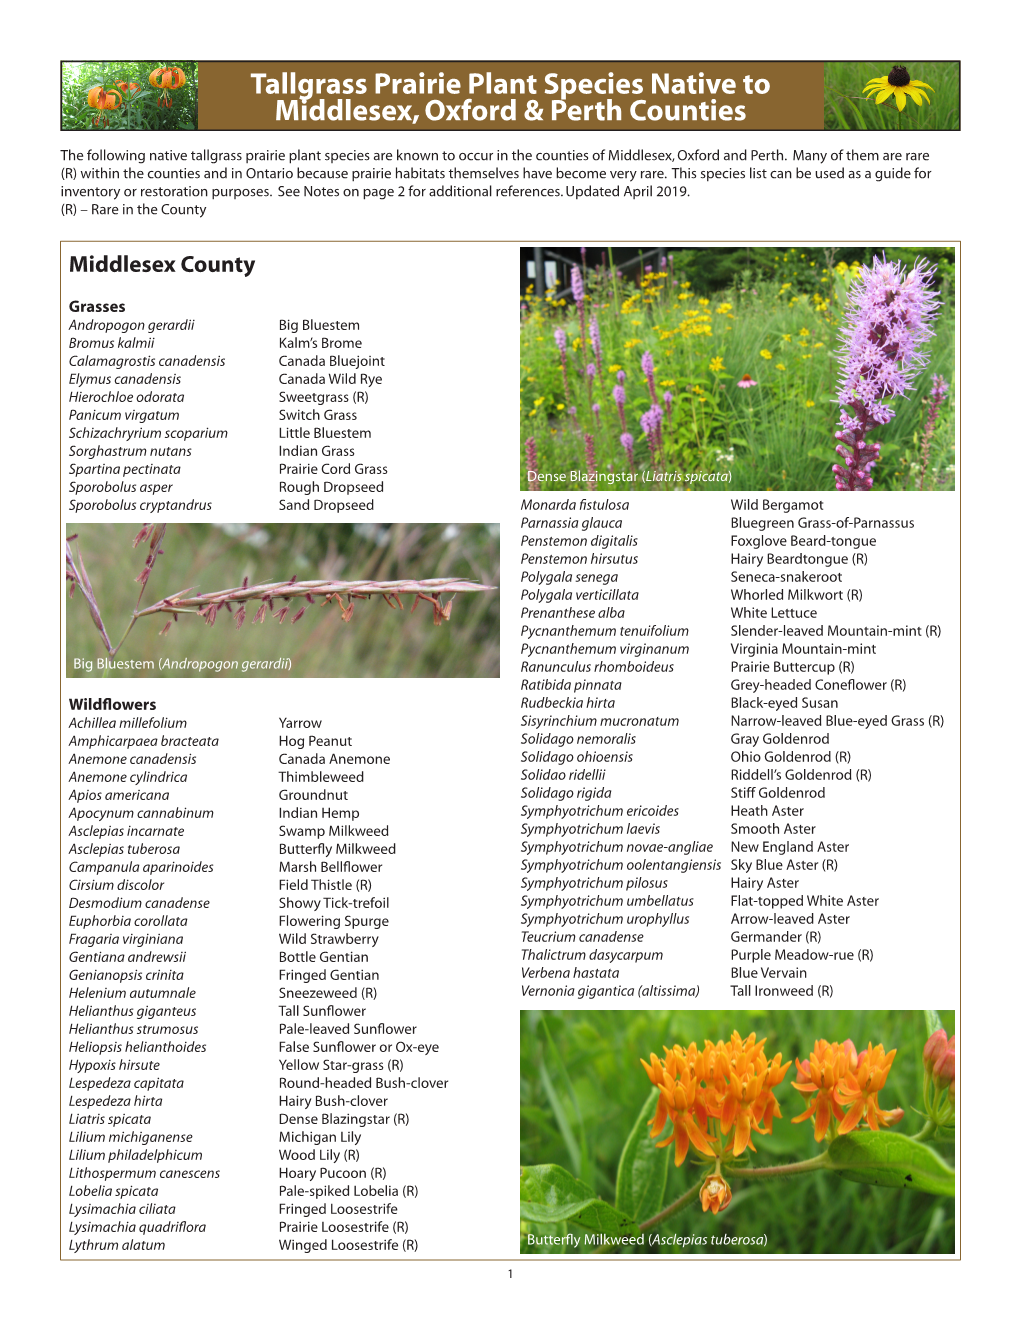 Tallgrass Prairie Plant Species Native to Middlesex, Oxford & Perth Counties